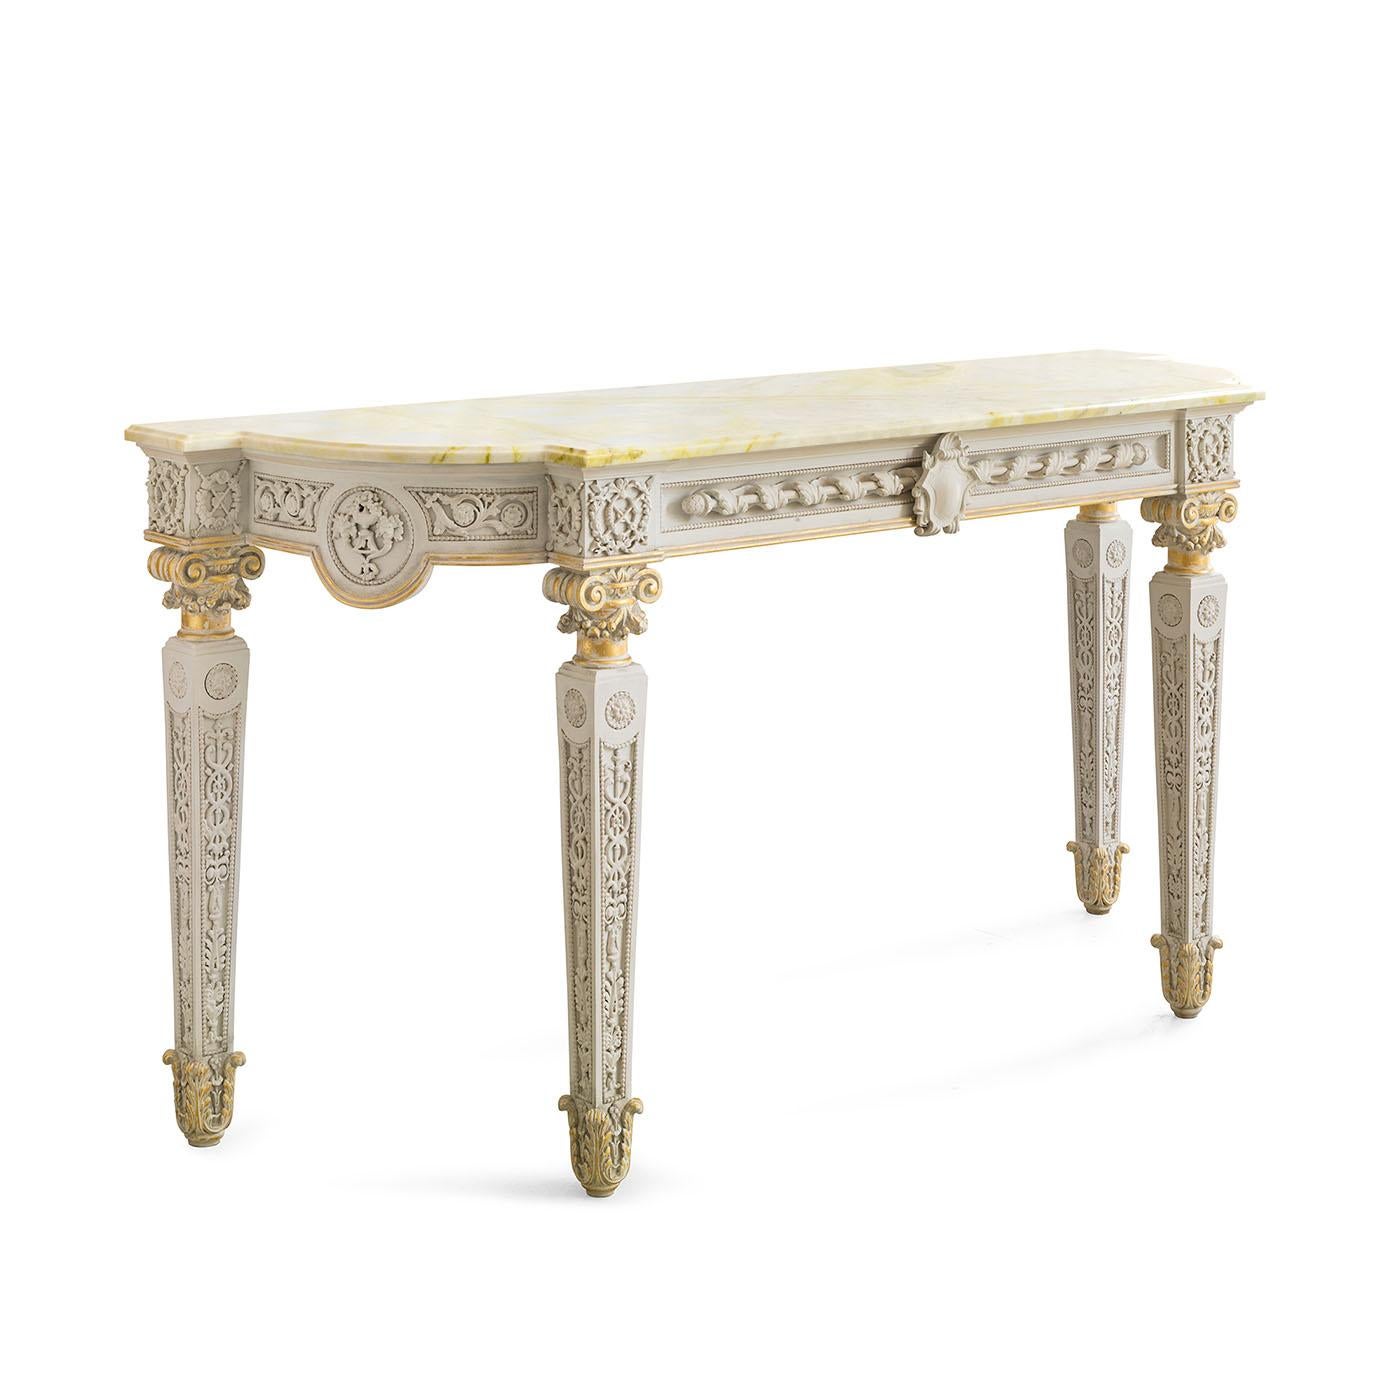 Gouthiere hand-carved console white and gold leaf finishing with marble top.